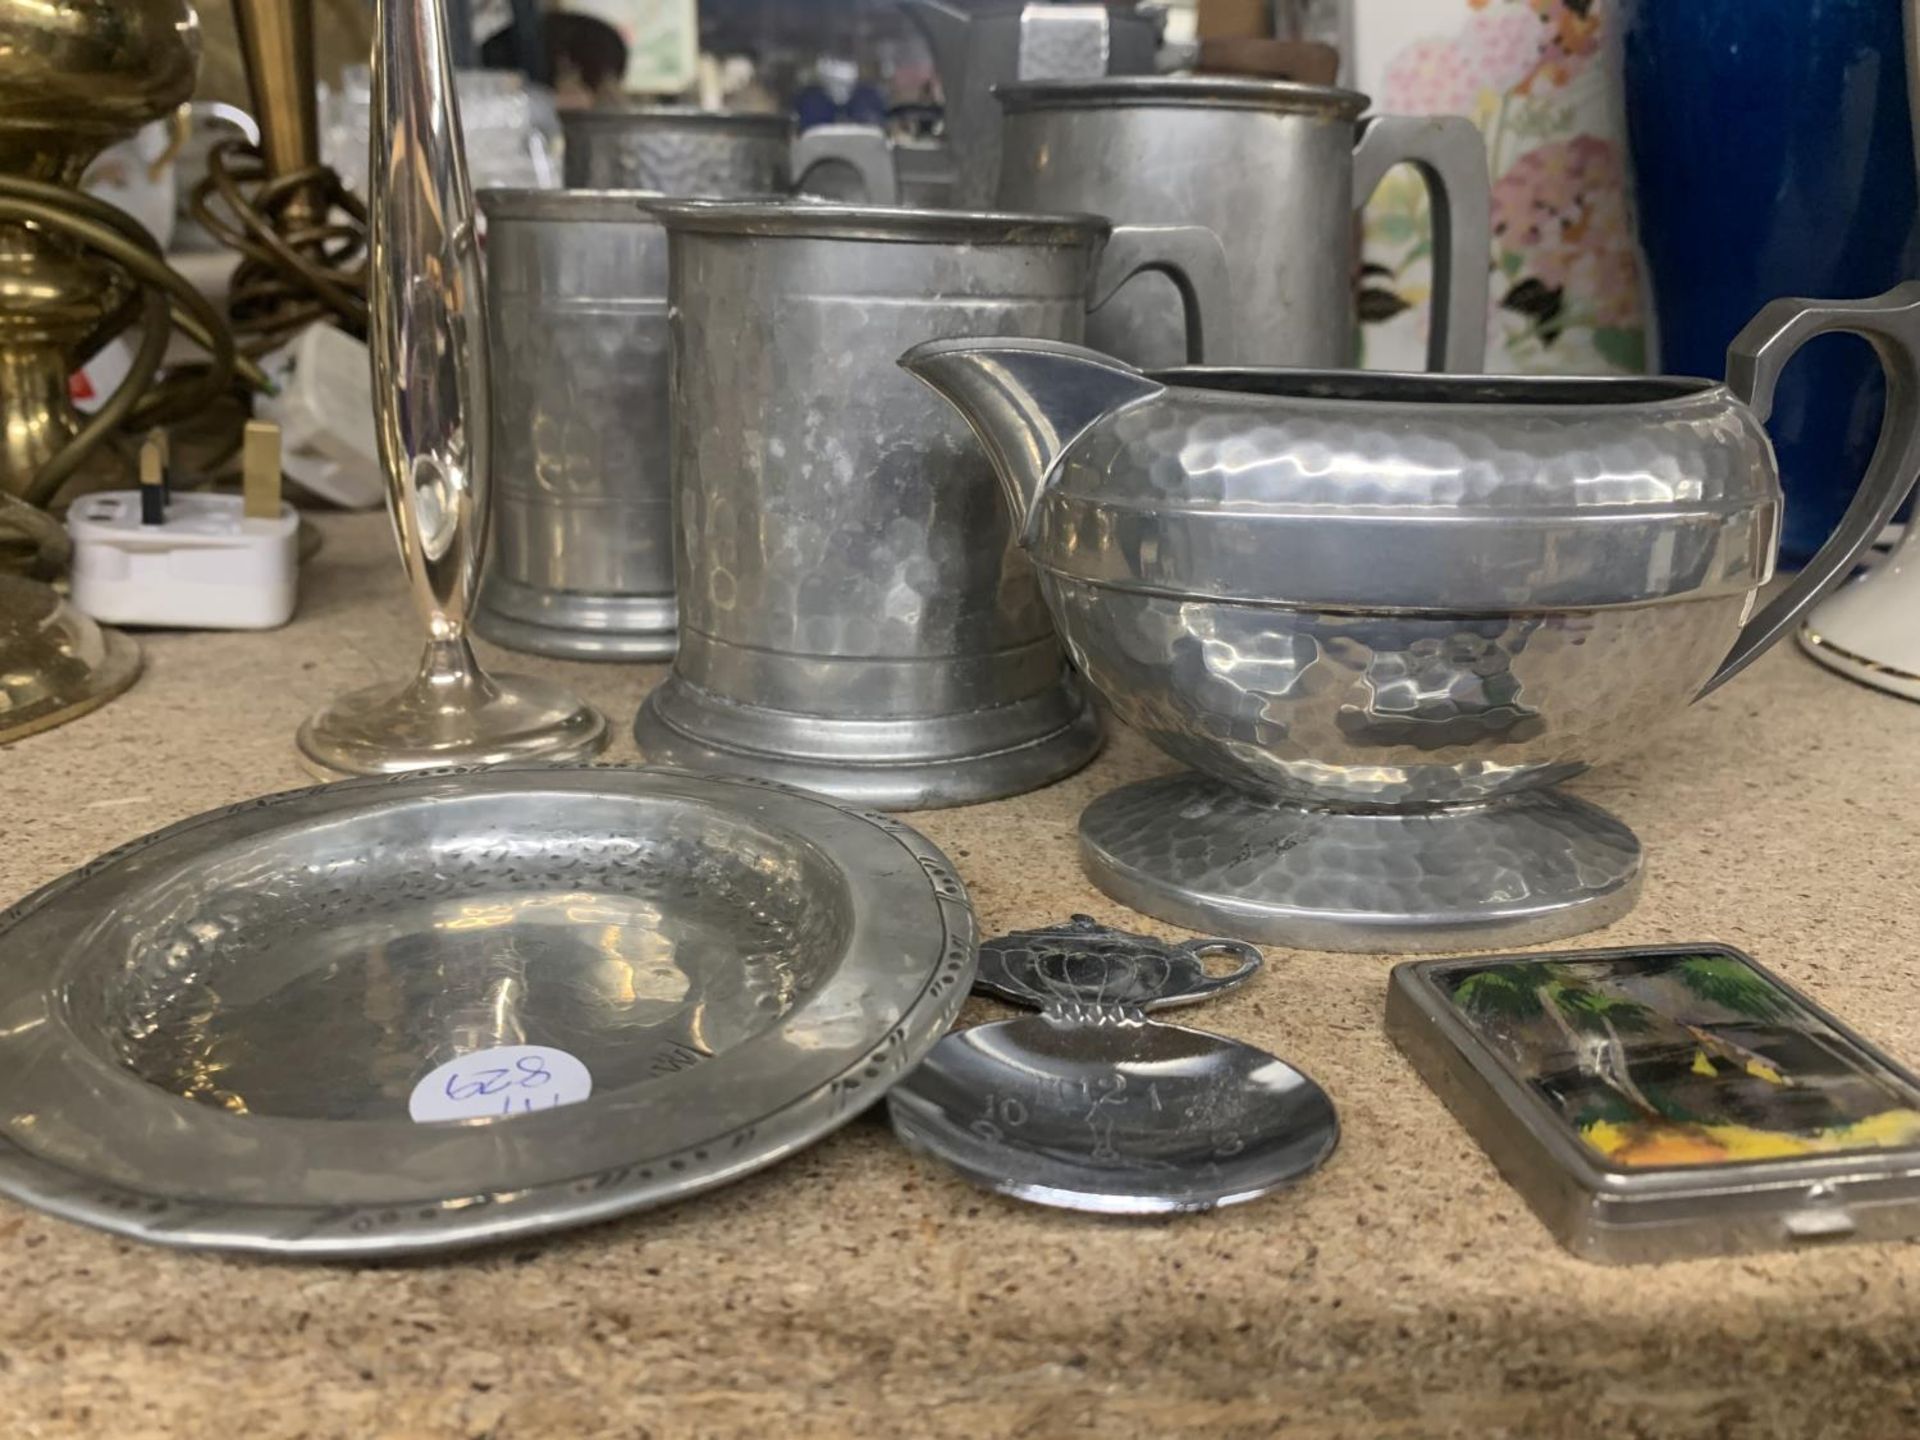 A QUANTITY OF PEWTER ITEMS TO INCLUDE TANKARDS, TEAPOTS, JUGS, BOWLS, ETC - Image 2 of 4